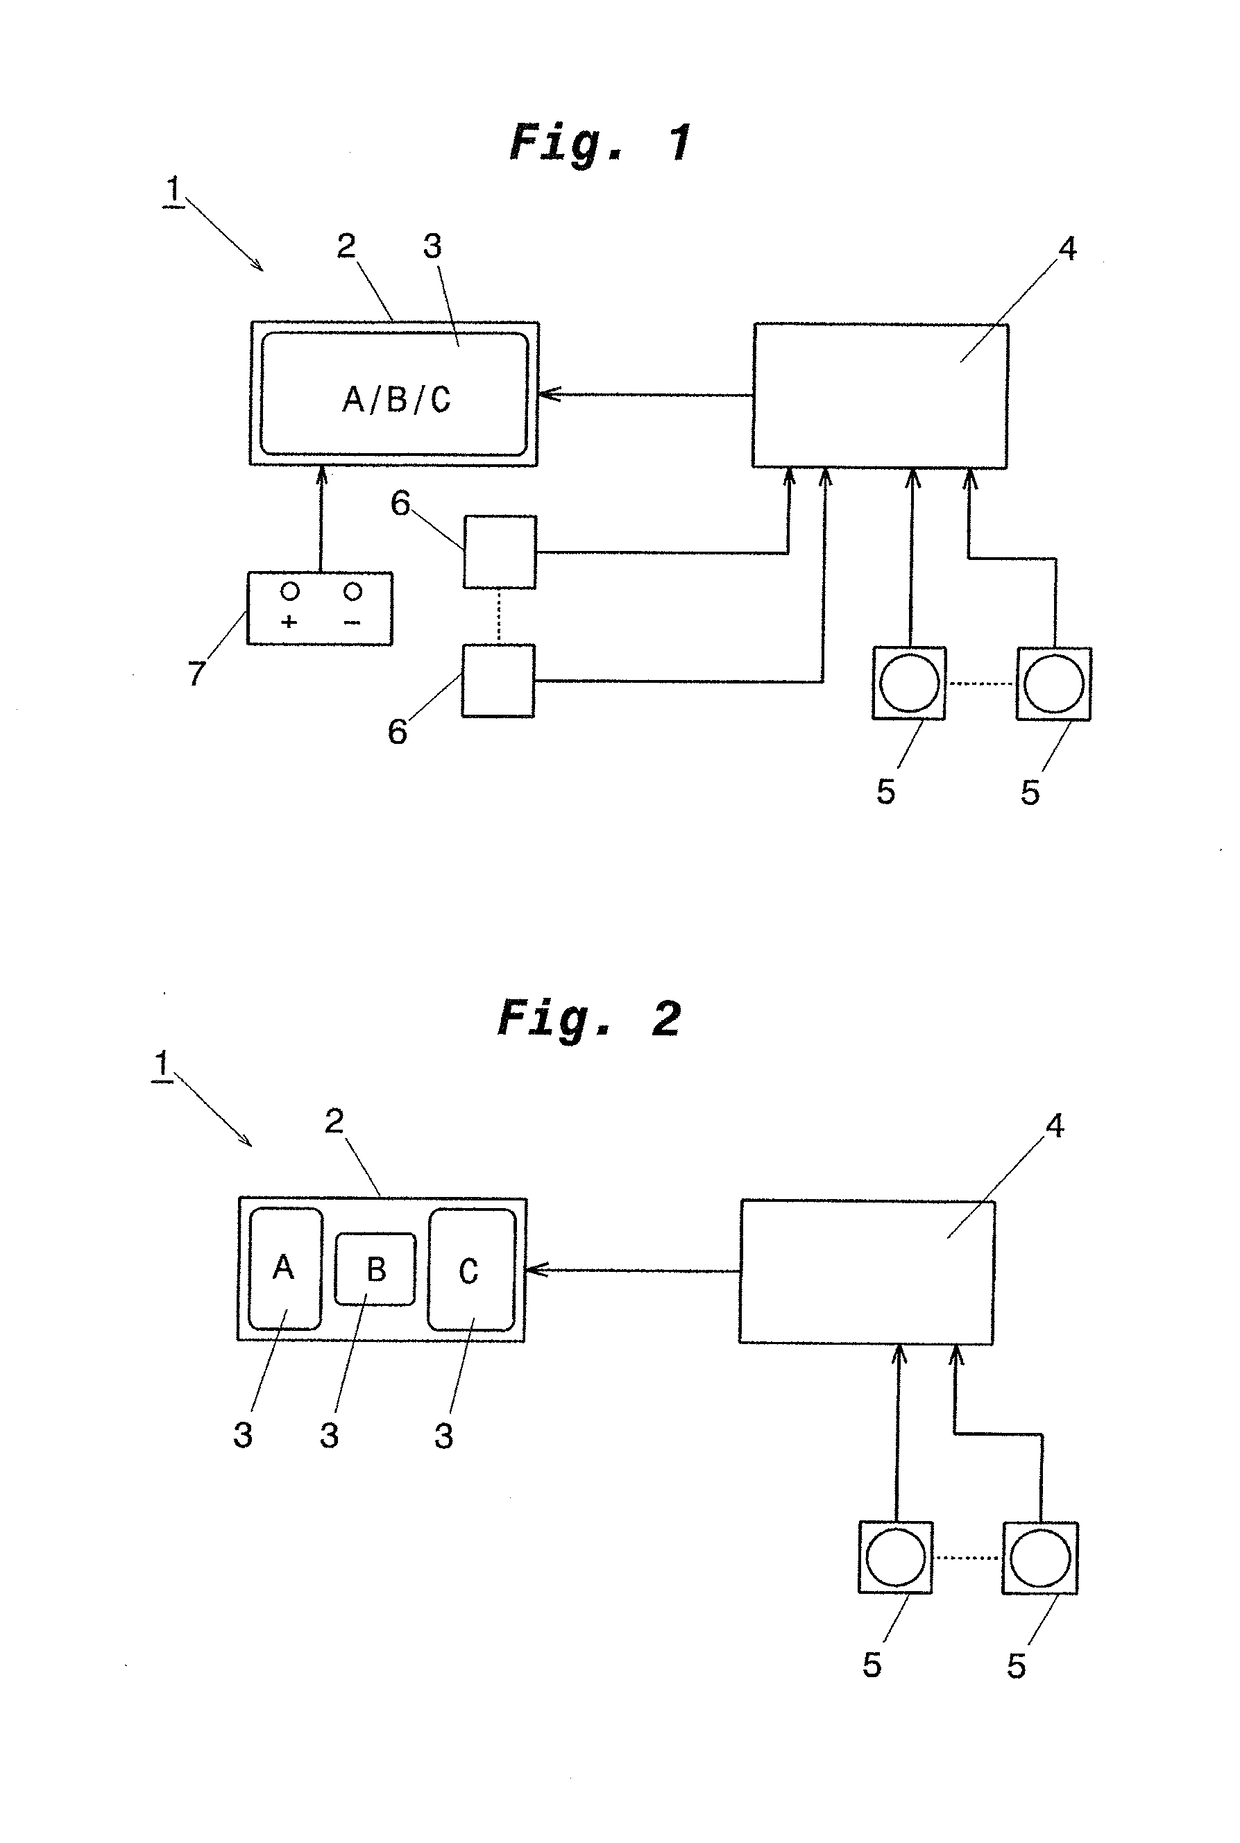 System for Visually Depicting Fields of View of a Commercial Vehicle